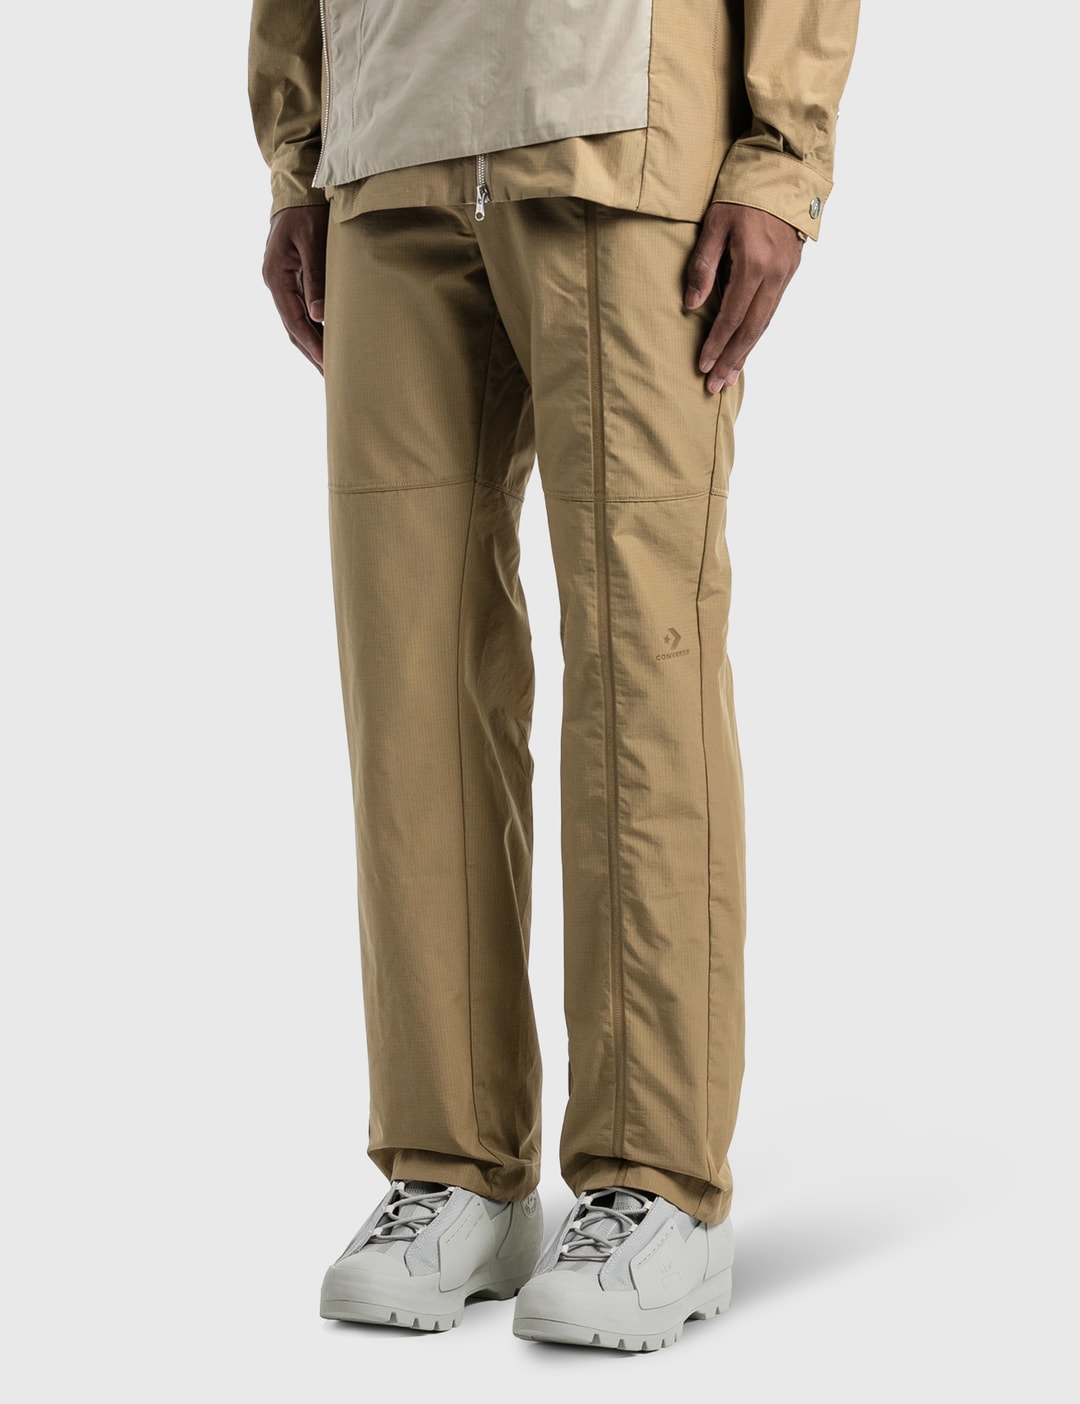 Converse - Converse x A-COLD-WALL* Pleat Pants | HBX - Globally Curated ...